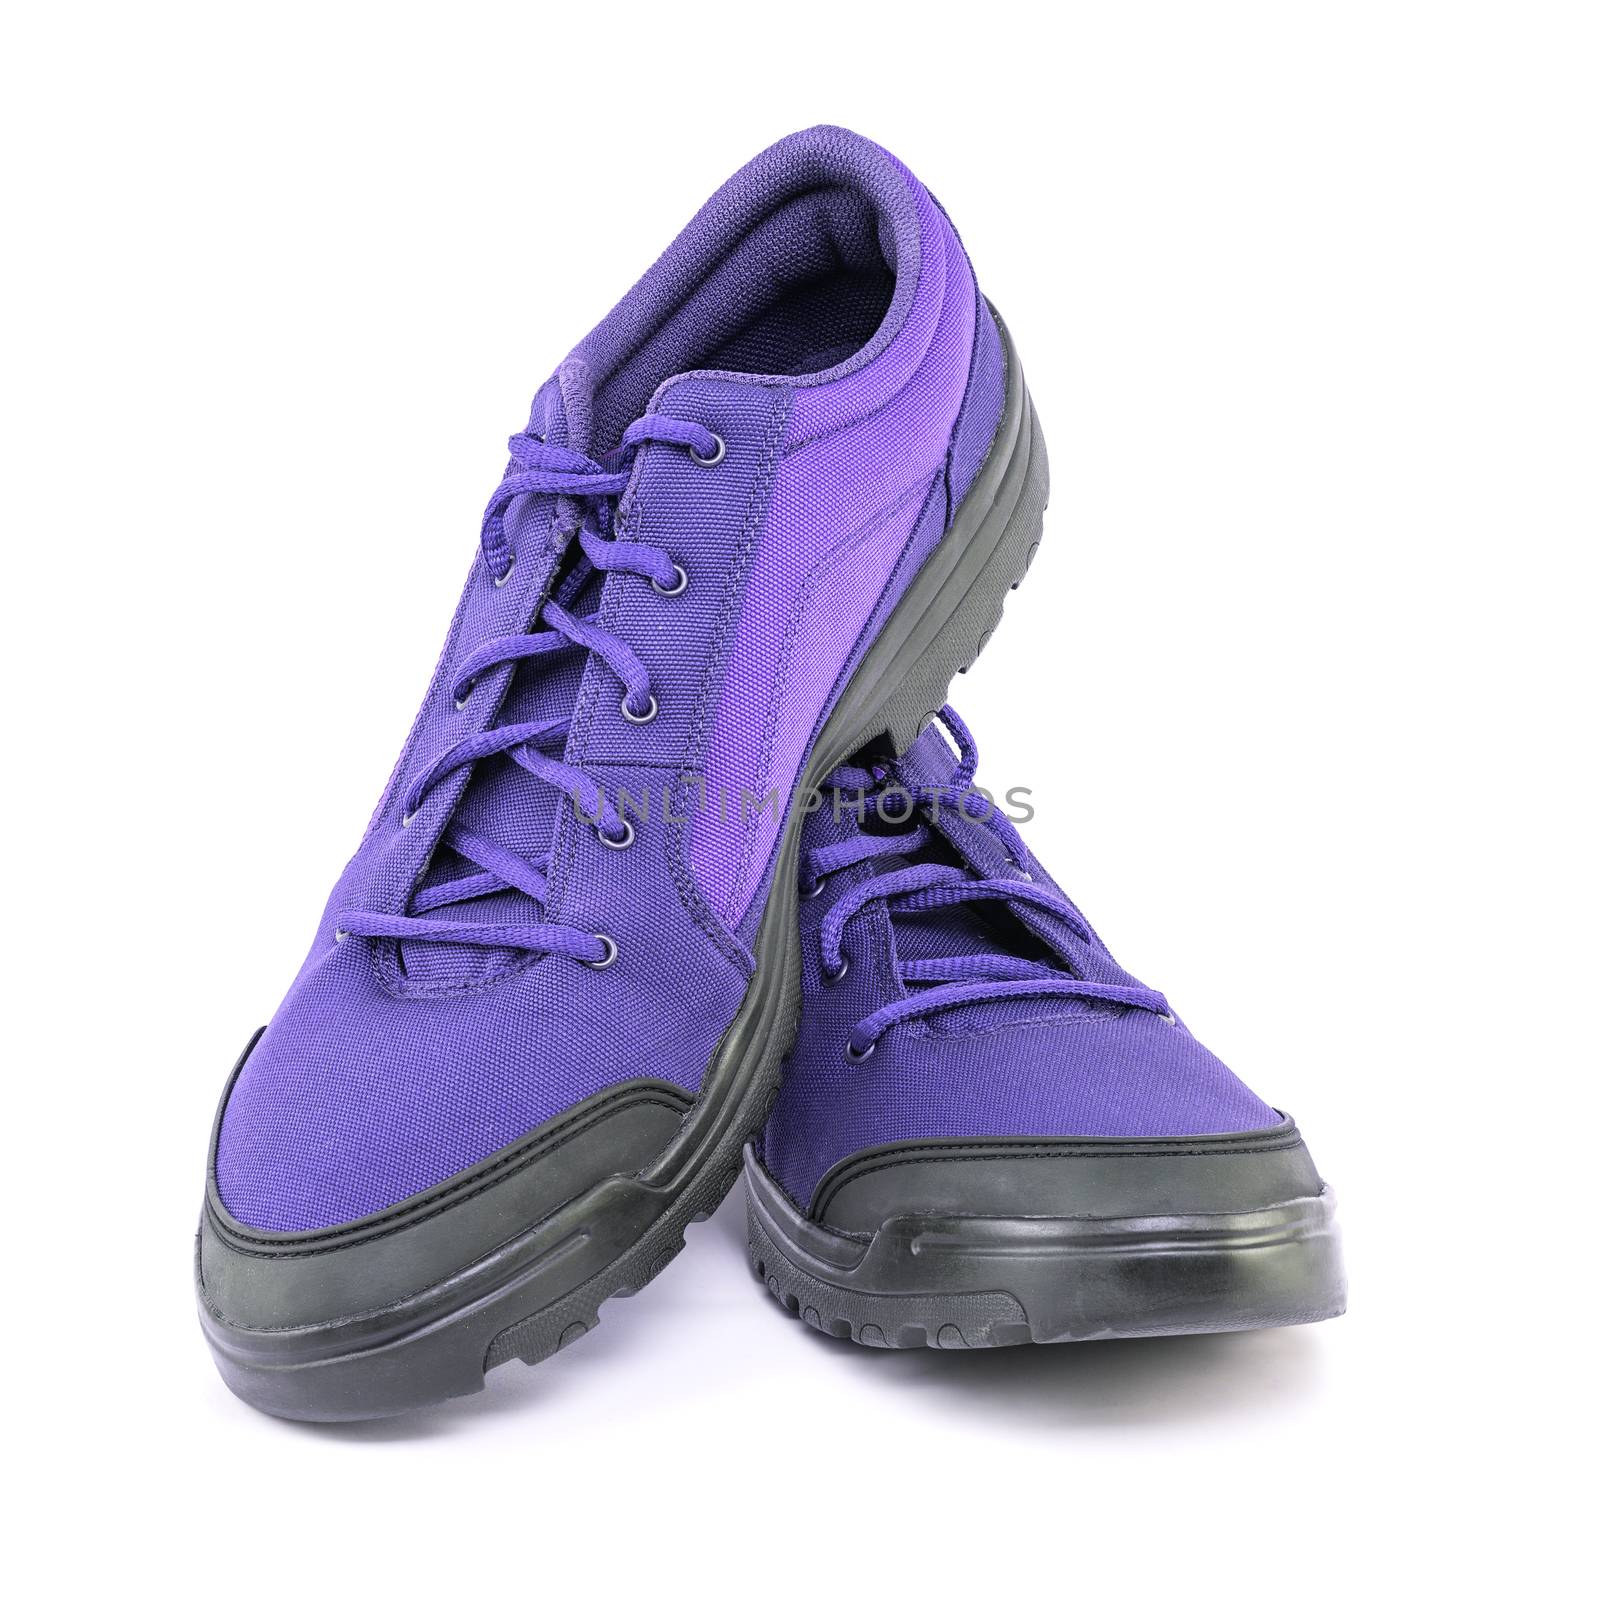 a pair of cheap cheap purple hiking shoes isolated on white background - perspective close-up view.